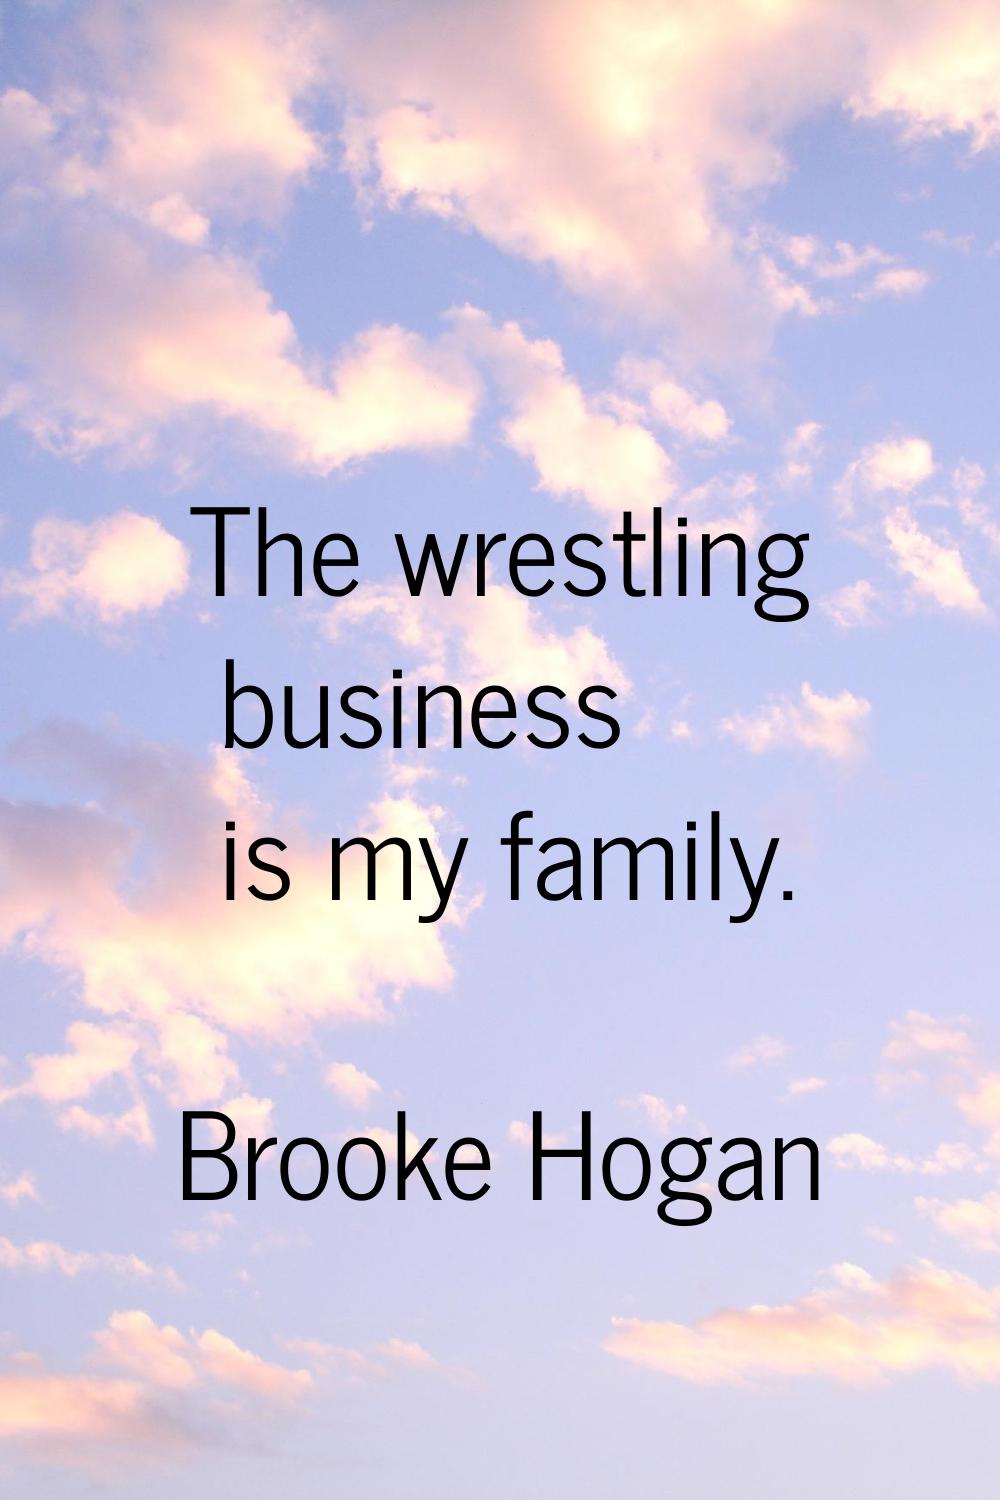 The wrestling business is my family.